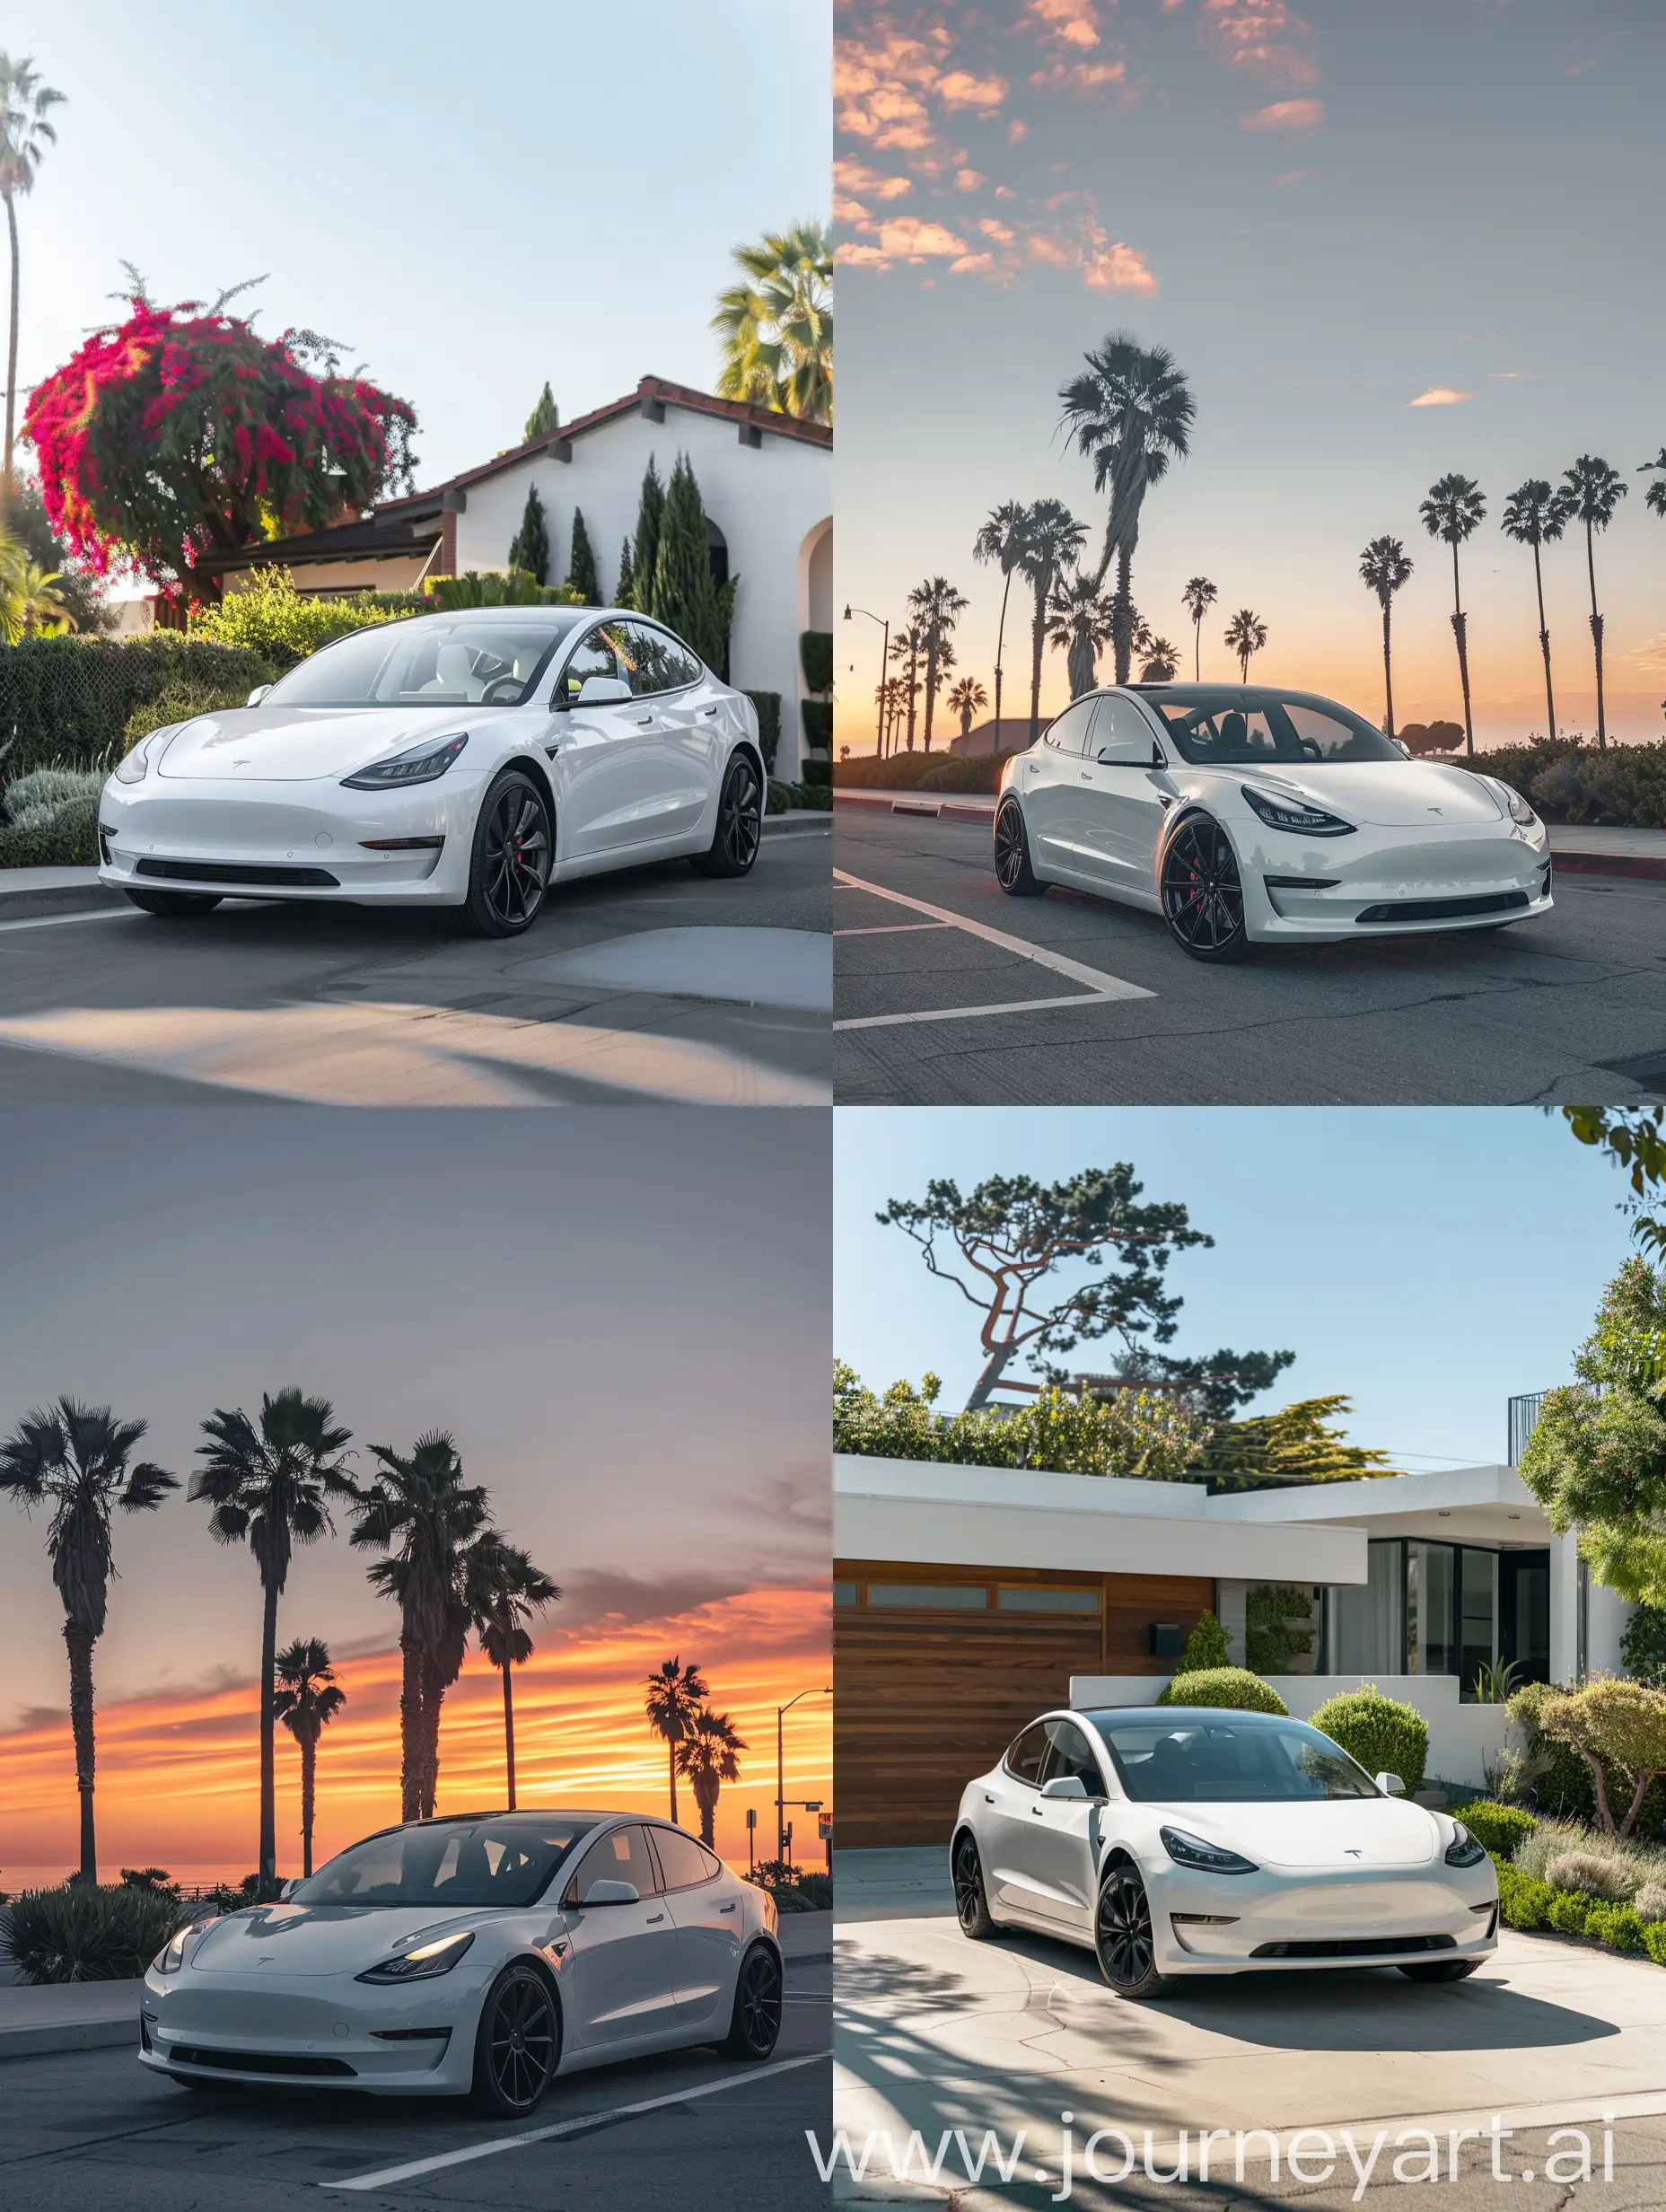 Prompt: "Capture the Elegance: Showcasing My White 2023 Tesla Model 3"

Description: You've just acquired your dream car, a sleek white 2023 Tesla Model 3, and it's time to capture its allure in stunning photographs. With its modern design and cutting-edge features, your Tesla exudes sophistication and style. Now, it's time to capture its essence in a series of captivating photos, perfect for sharing on Instagram. Let your creativity flow as you compose each shot to highlight the beauty and allure of your stunning new ride."